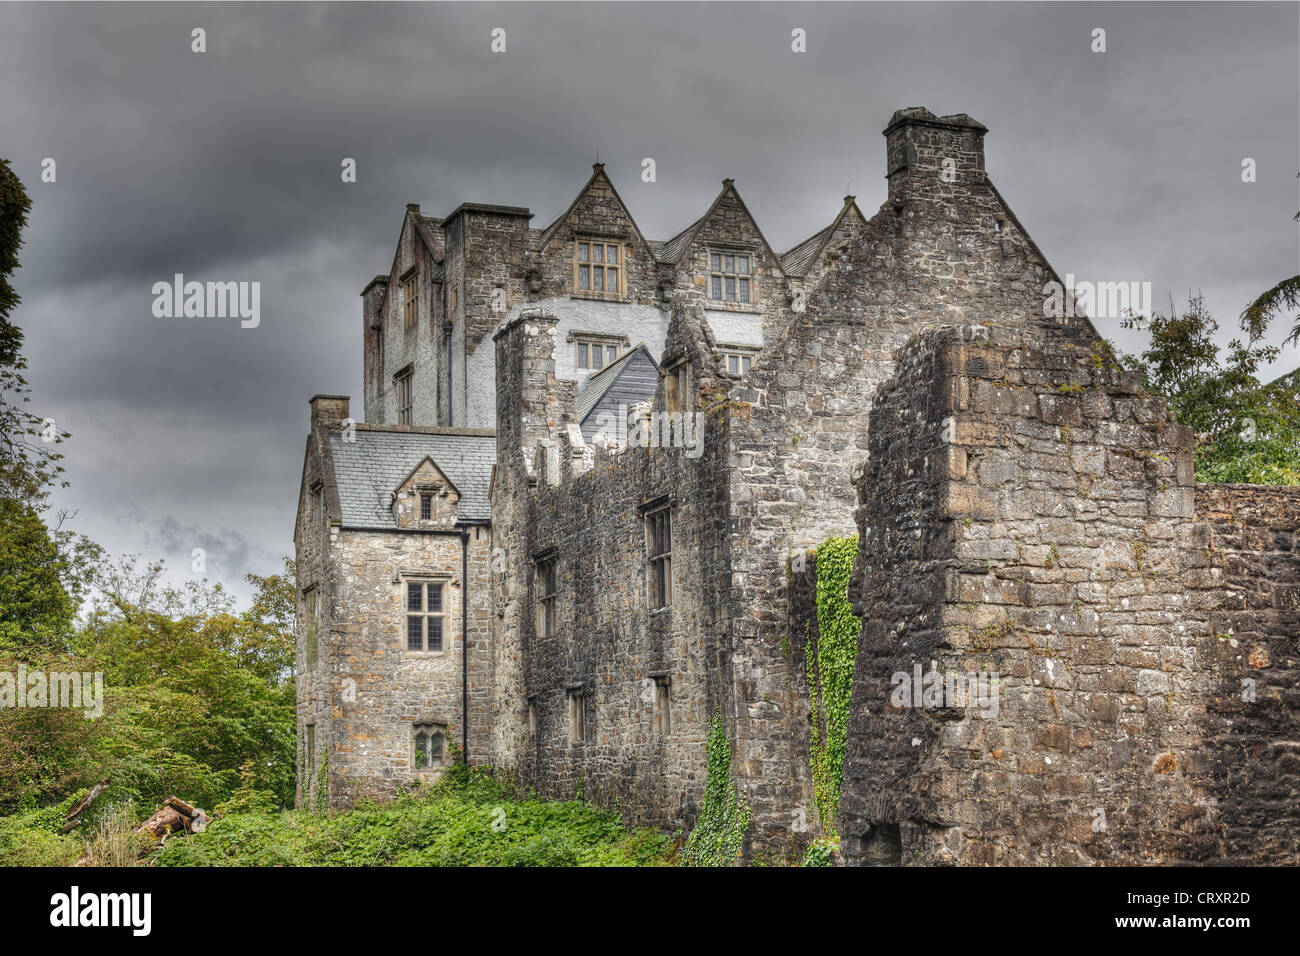 Ireland, County Donegal, View of Donegal Castle Stock Photo